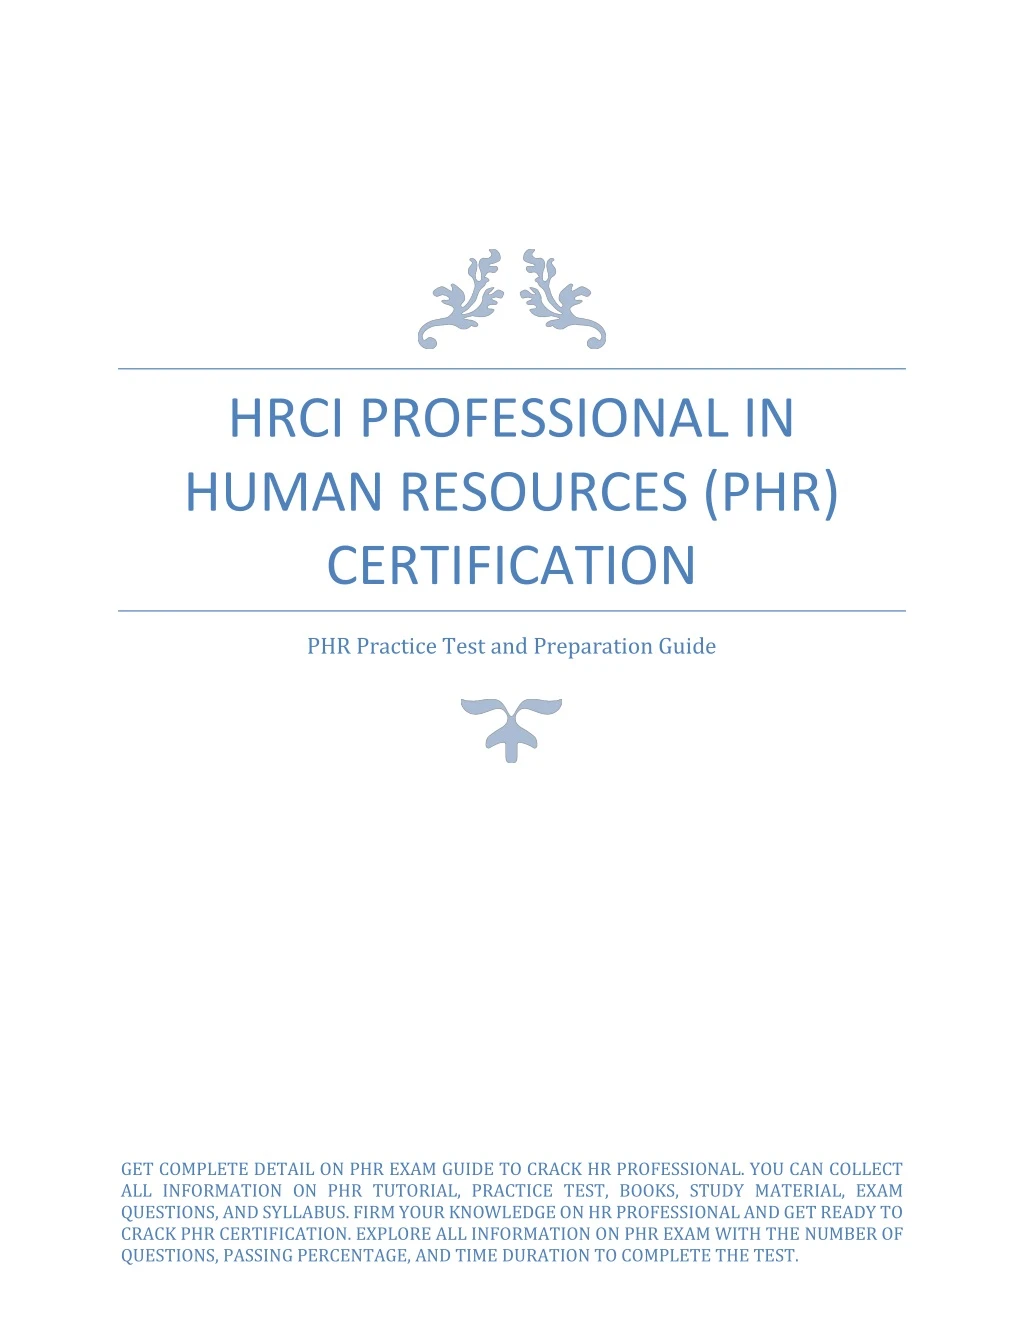 hrci professional in human resources